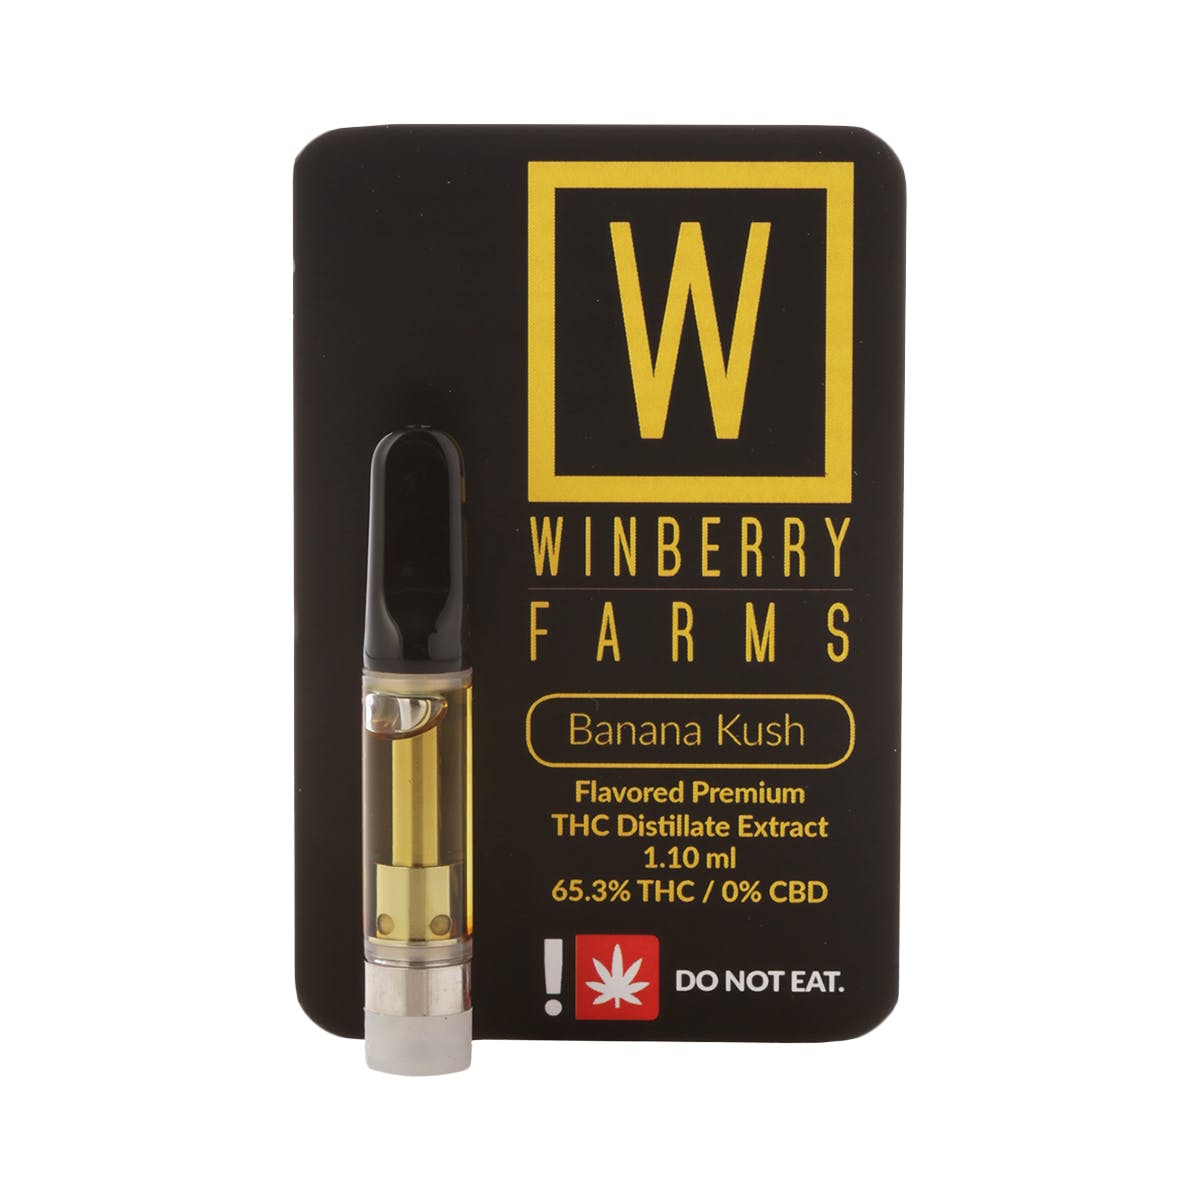 concentrate-winberry-farms-oregon-banana-kush-cartridge